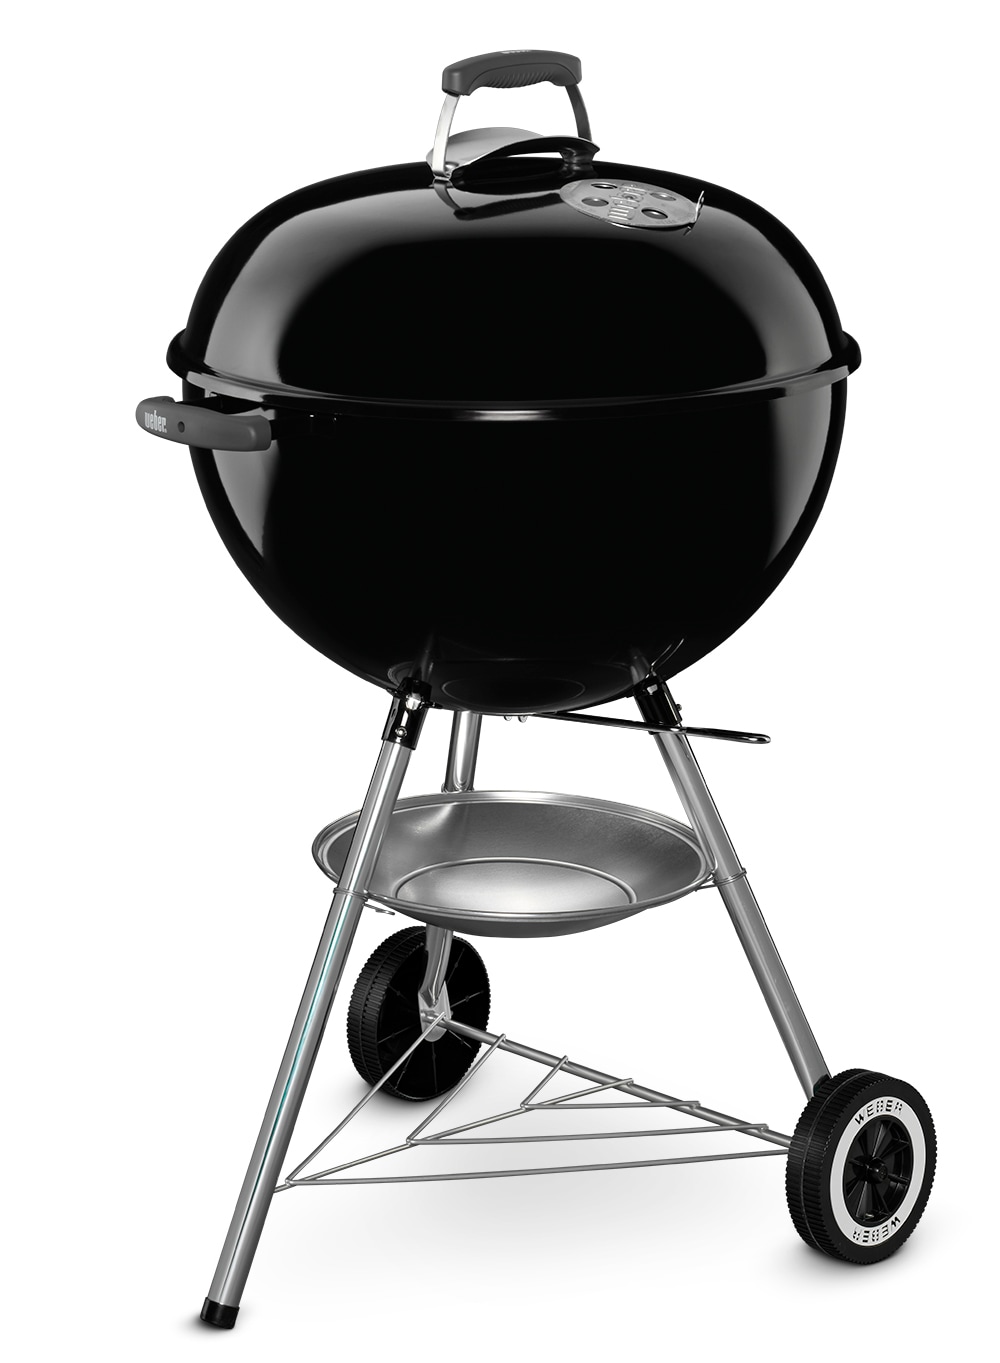 Weber Original Kettle W Kettle Charcoal Grill in the Charcoal Grills department Lowes.com